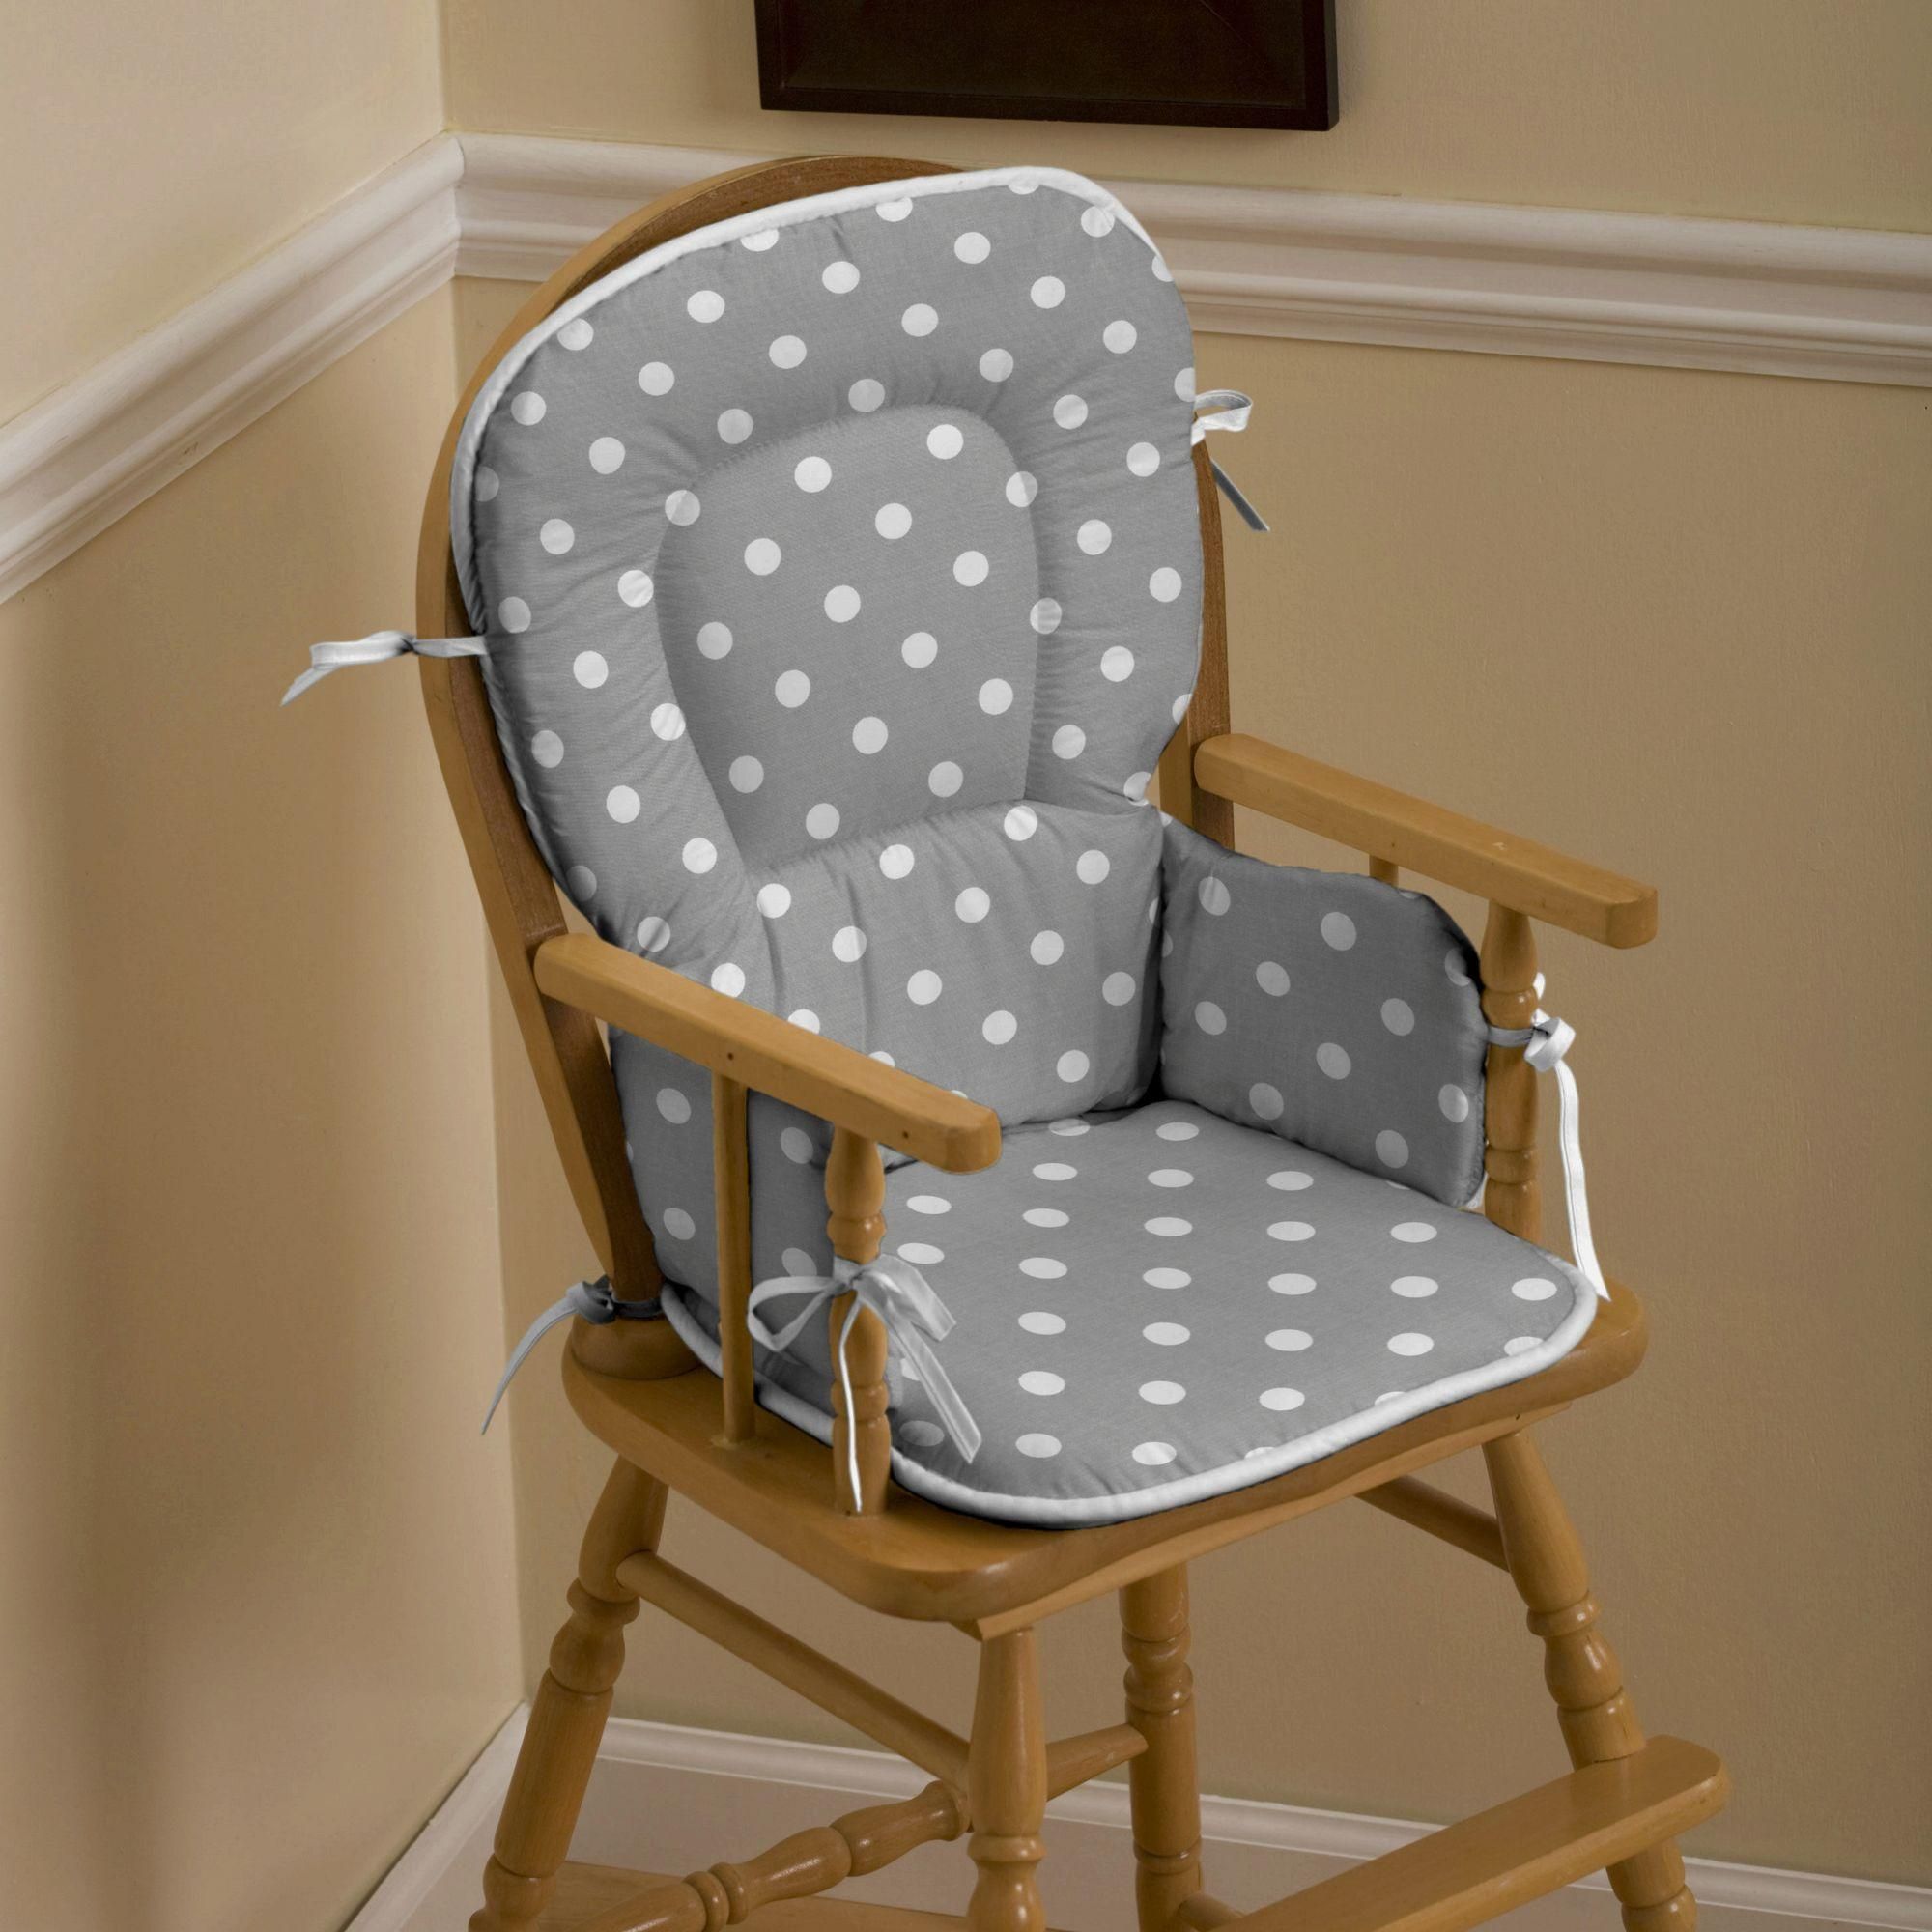 High Chair Cover Review: Protect Your Baby and Keep Clean